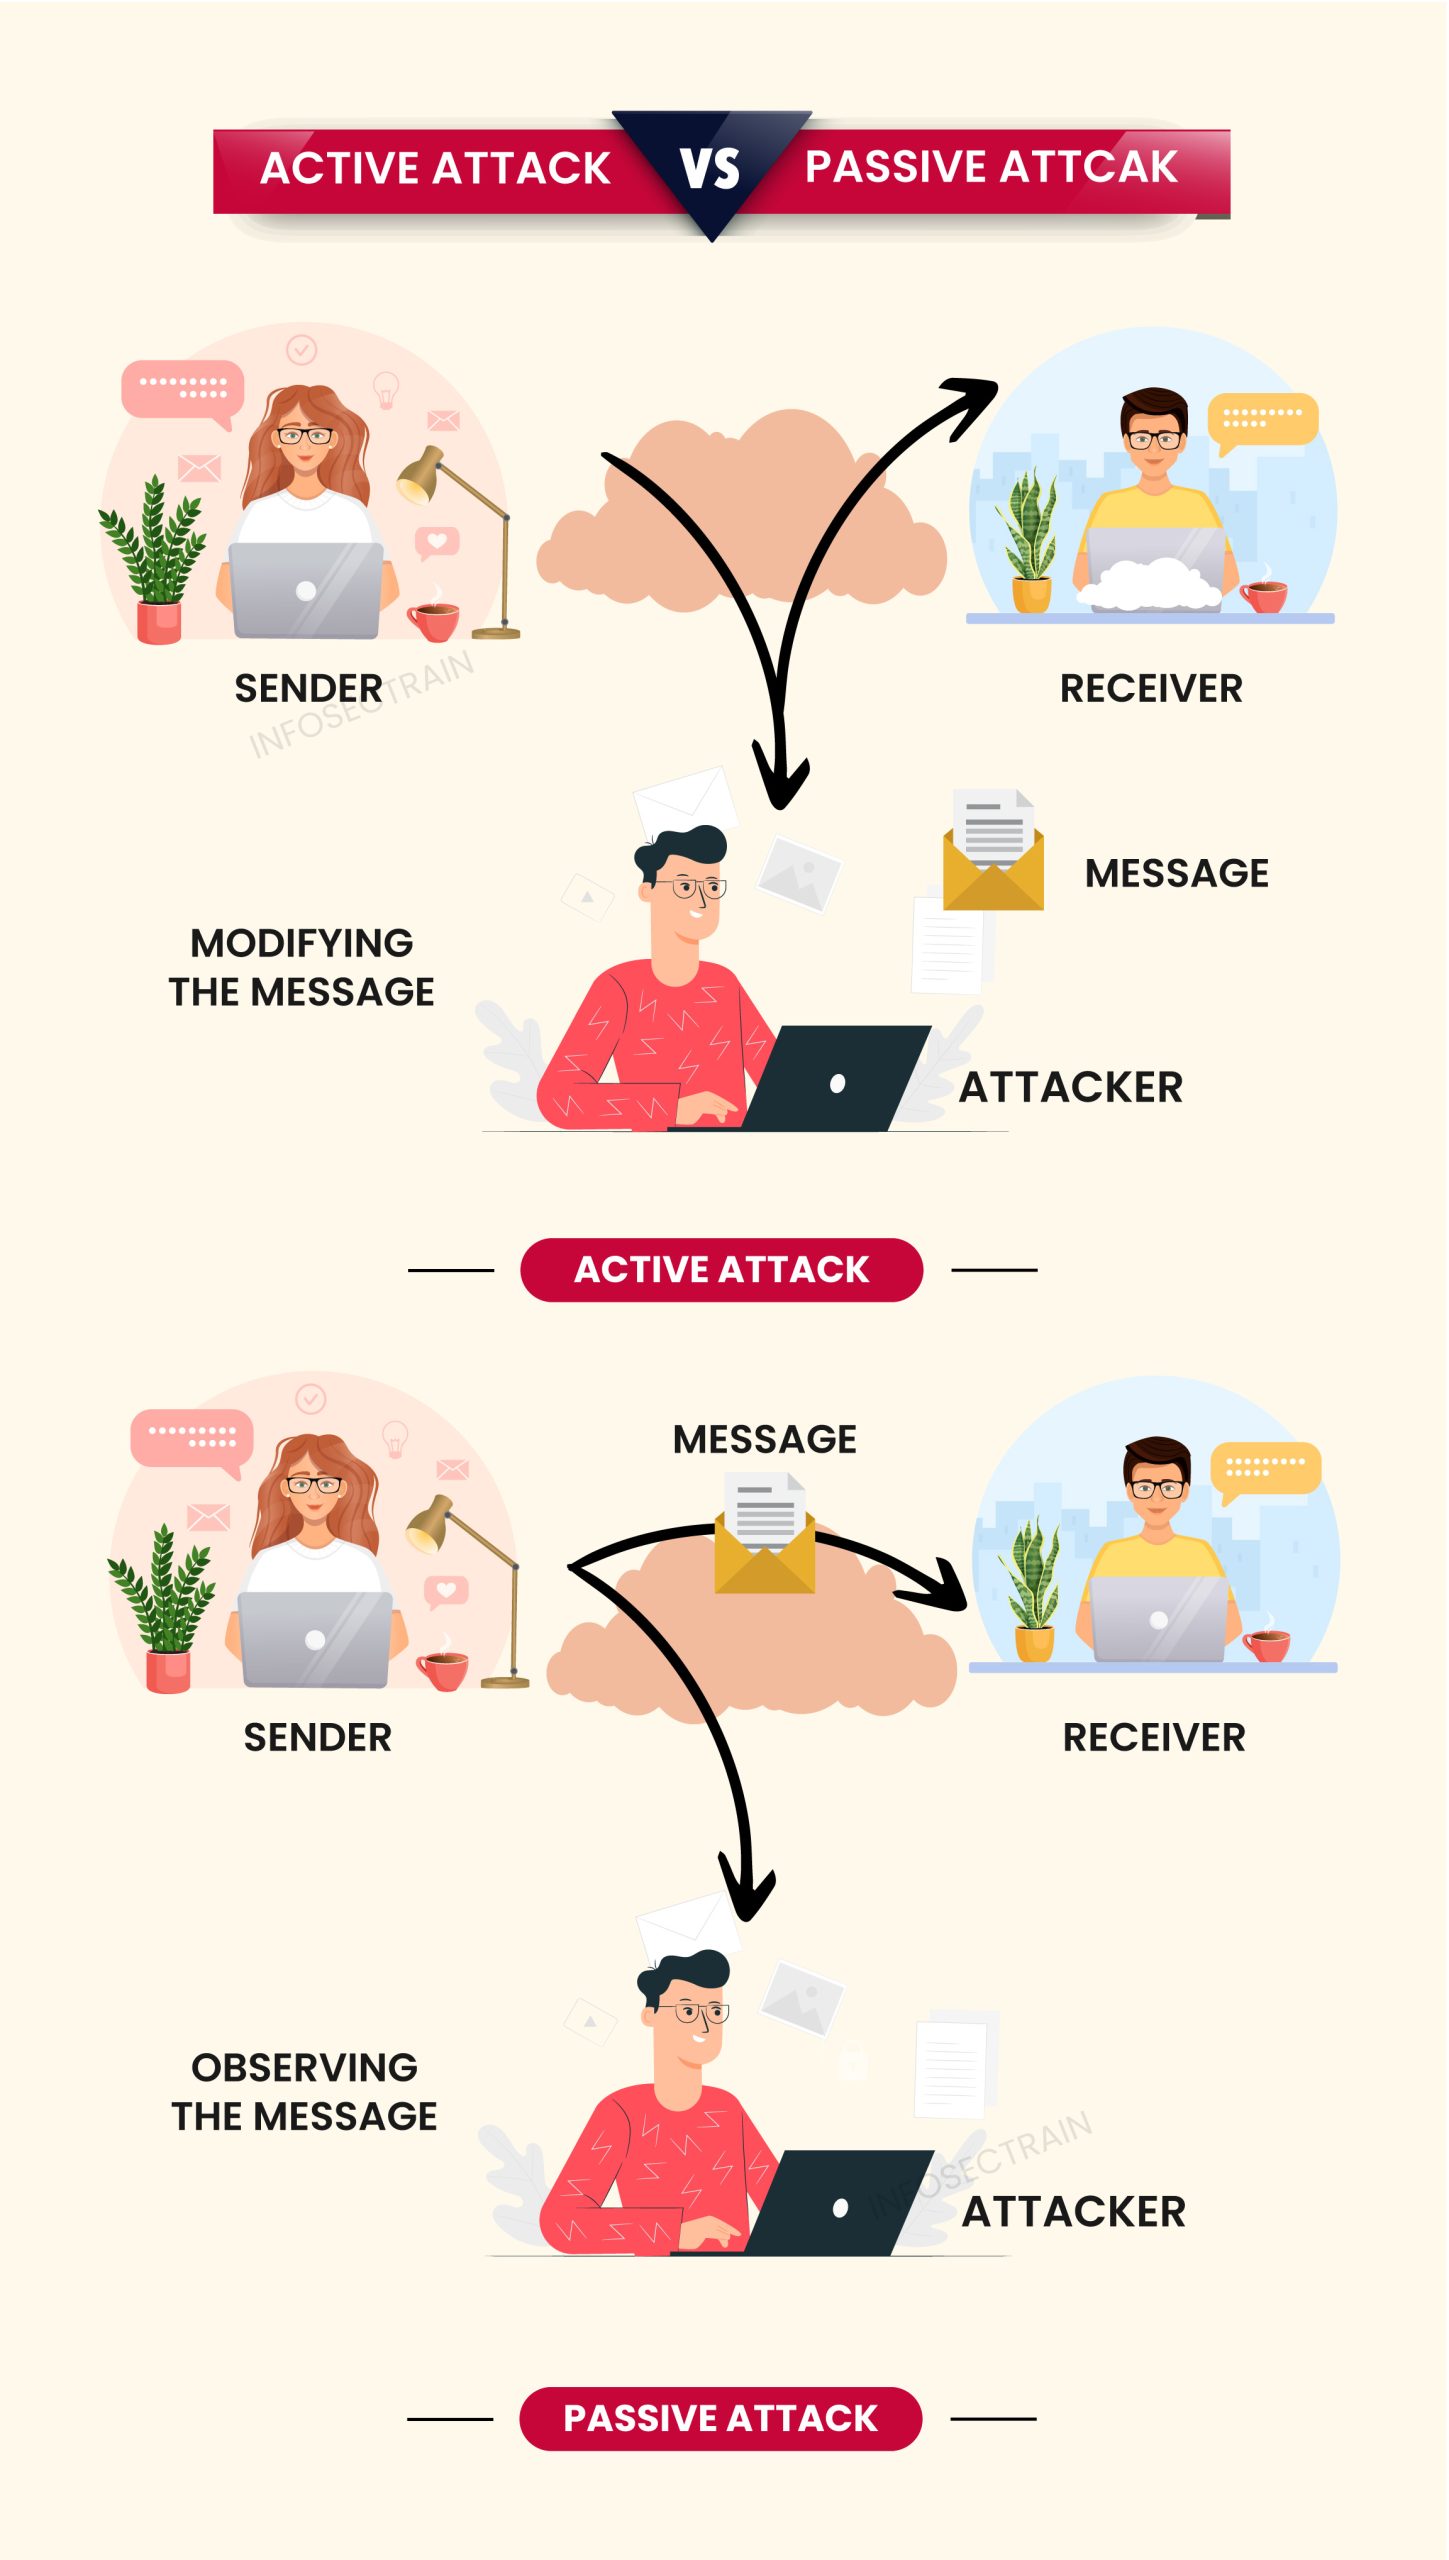 Differences between active attack and passive attack